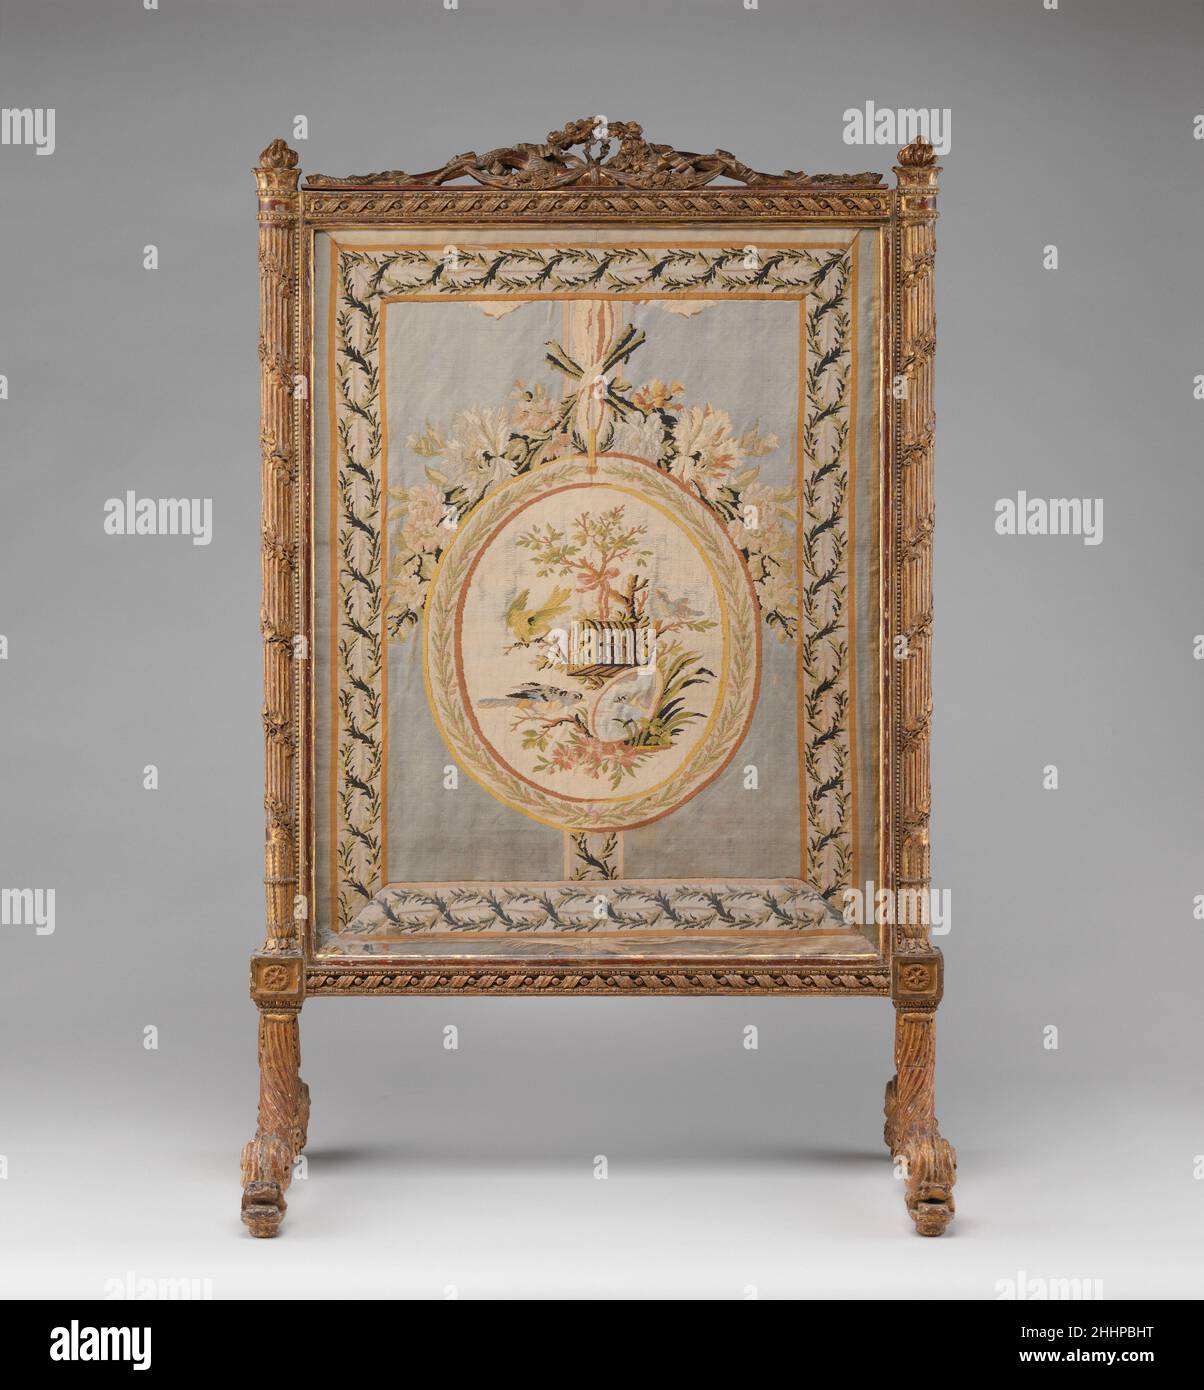 A Louis XVI blue and white painted wood fire screen, stamped by Georges  Jacob, delivered for Queen Marie-Antoinette's private apartments at  Versailles